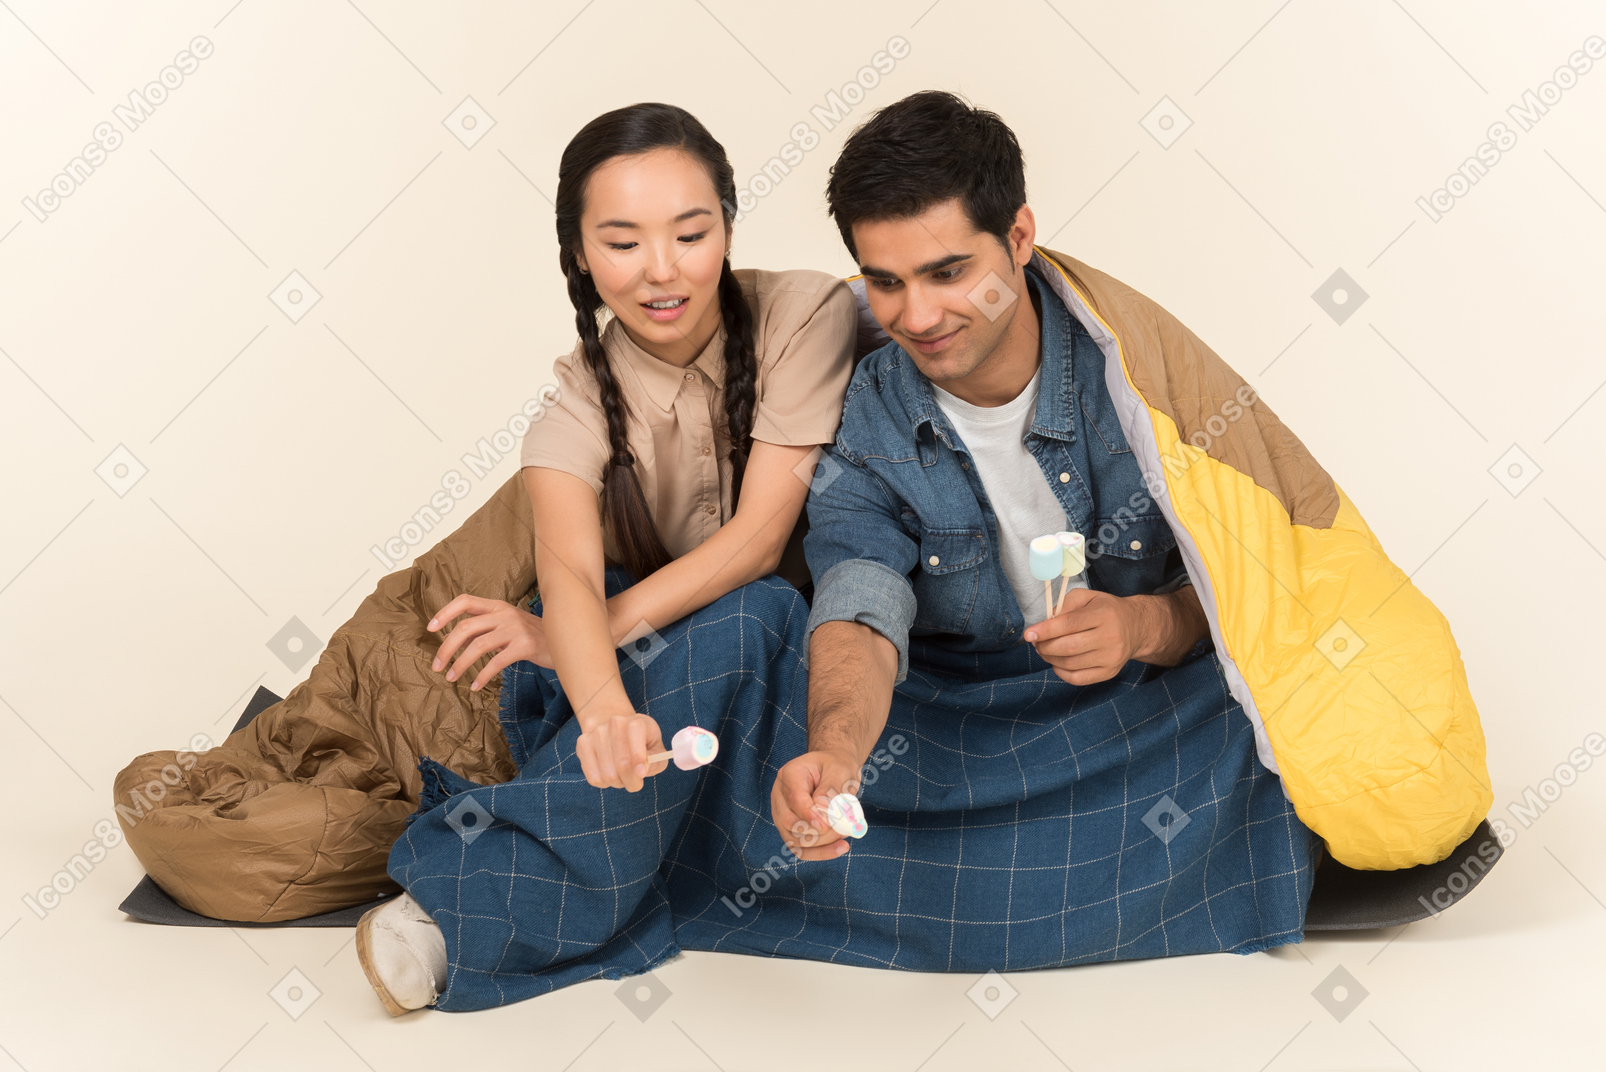 Young interracial couple sitting in sleeping bag and holding marshmallows